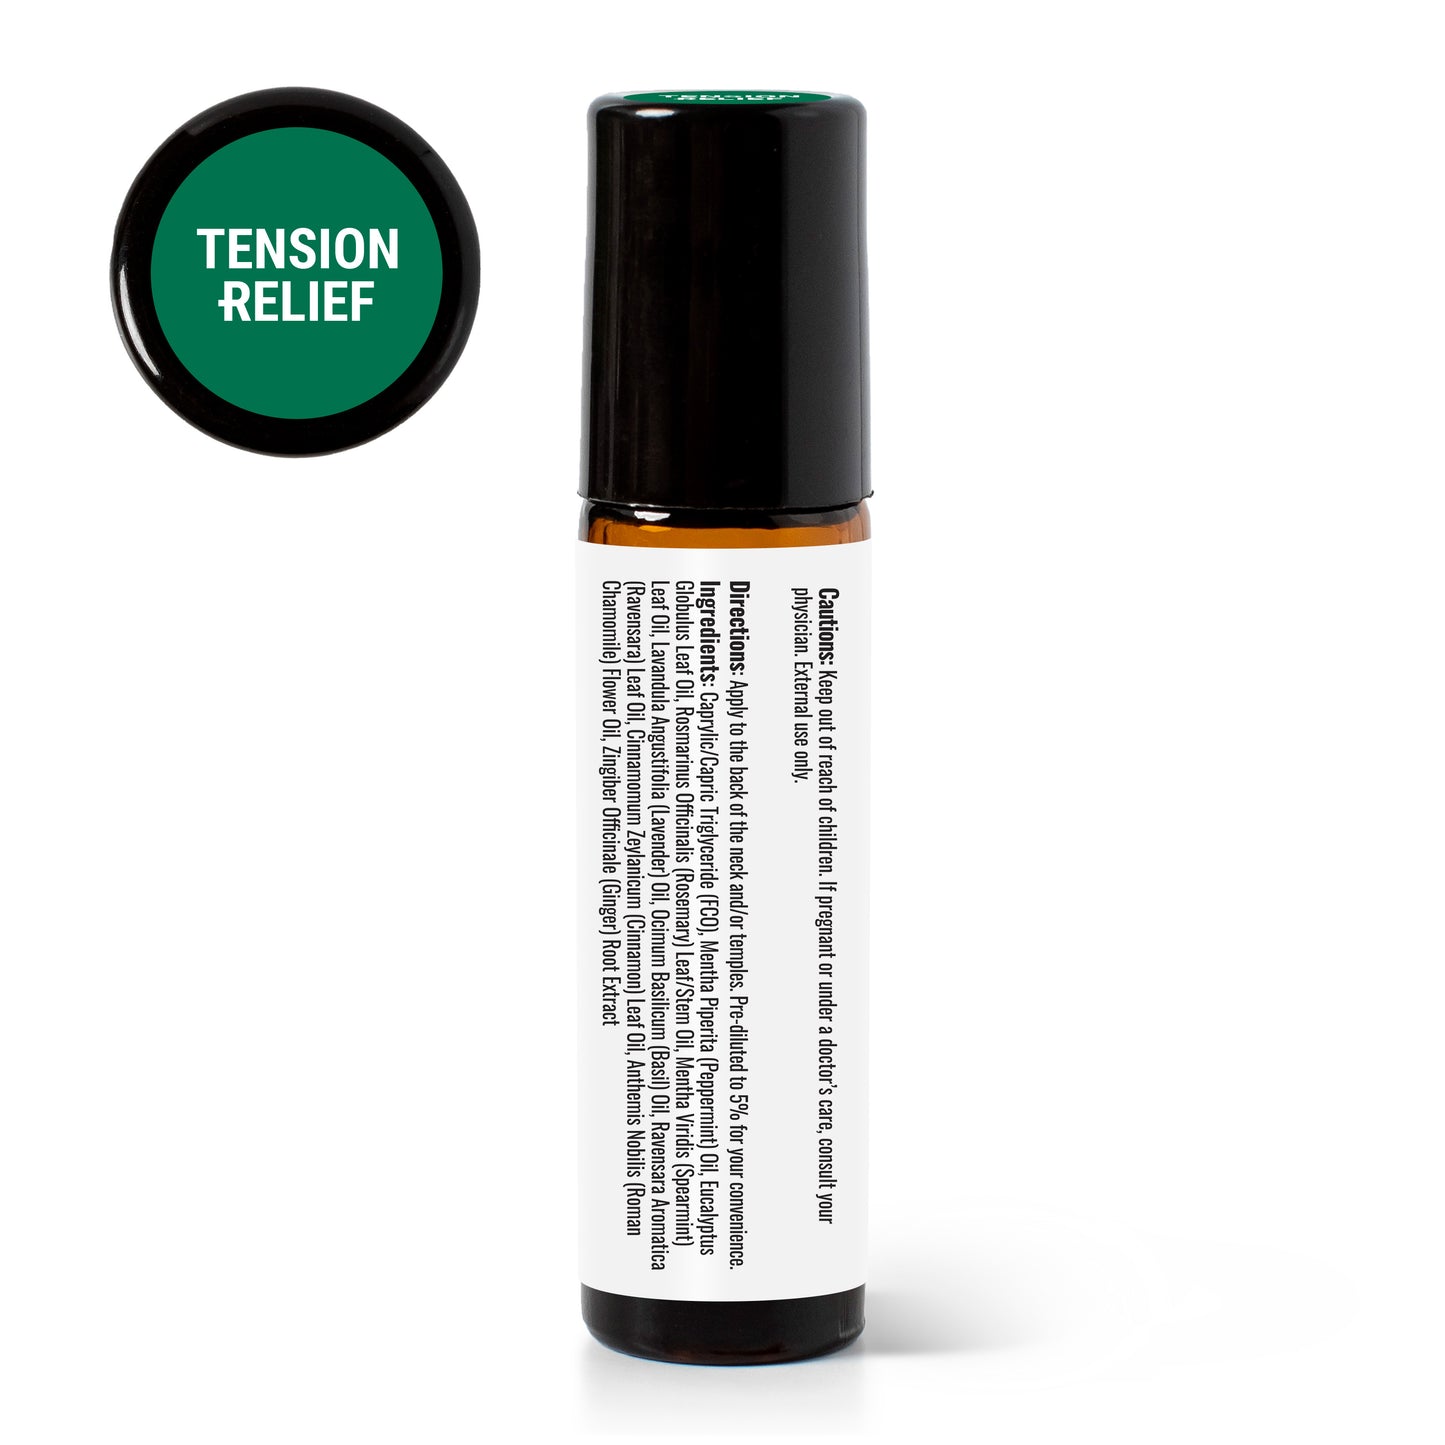 Tension Relief Essential Oil Blend Pre-Diluted Roll-On back label